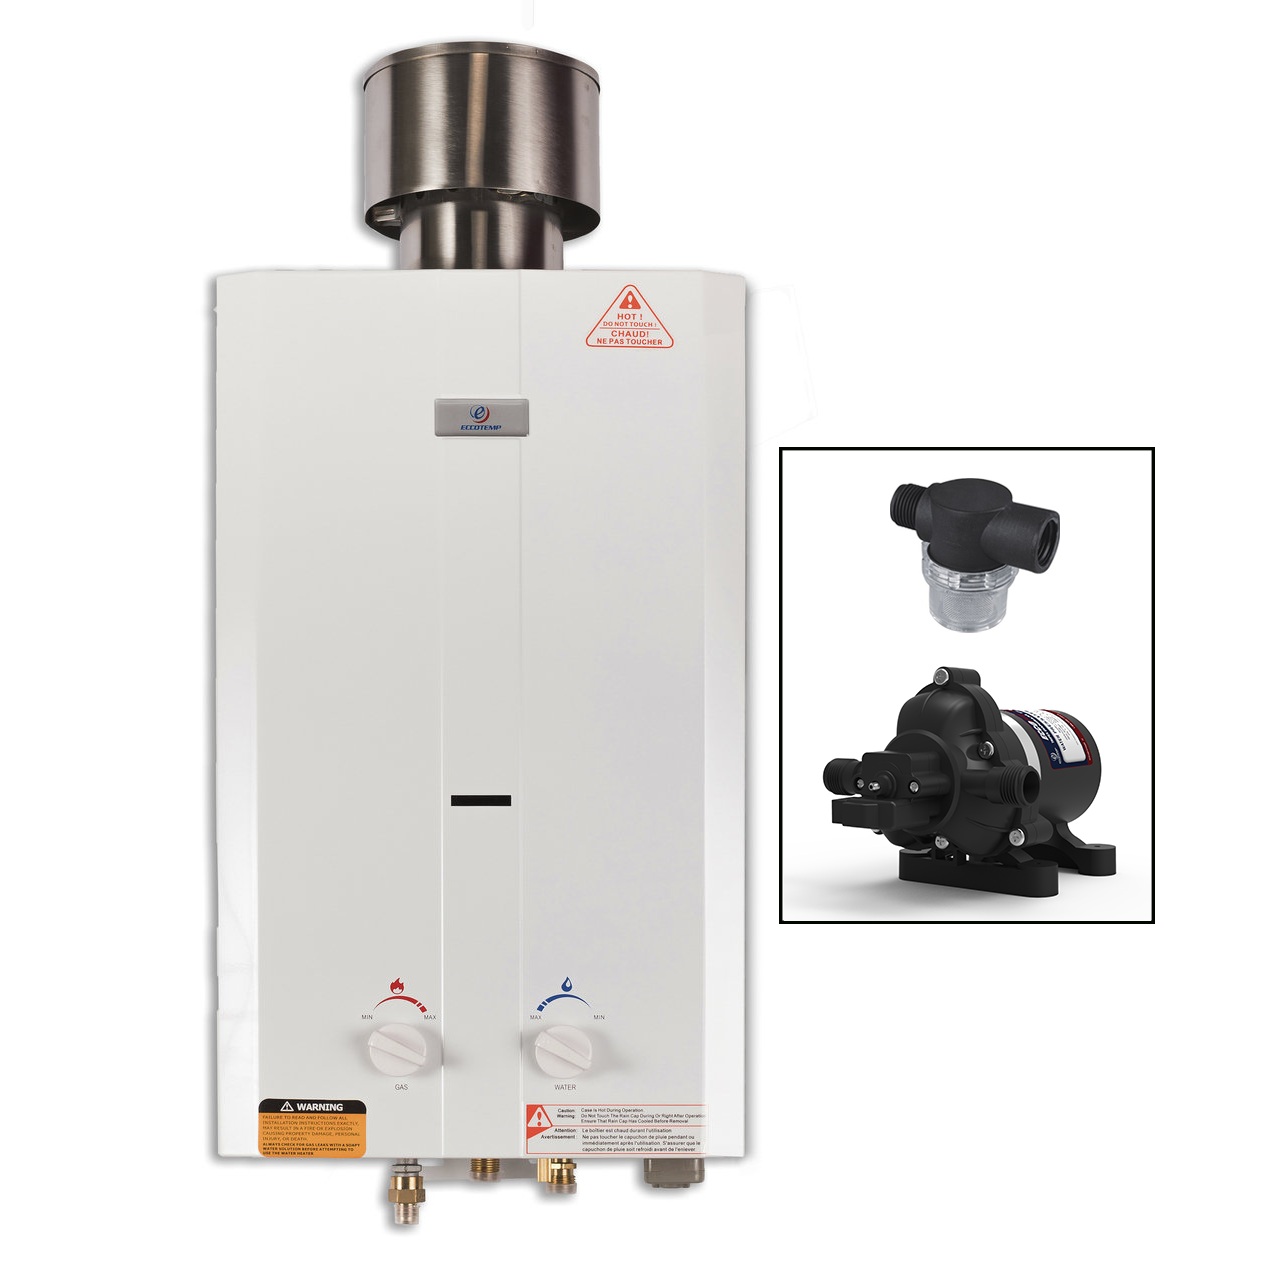 Eccotemp Systems L10-PS L10 Portable Outdoor Tankless Water Heater with EccoFlo Pump& Strainer